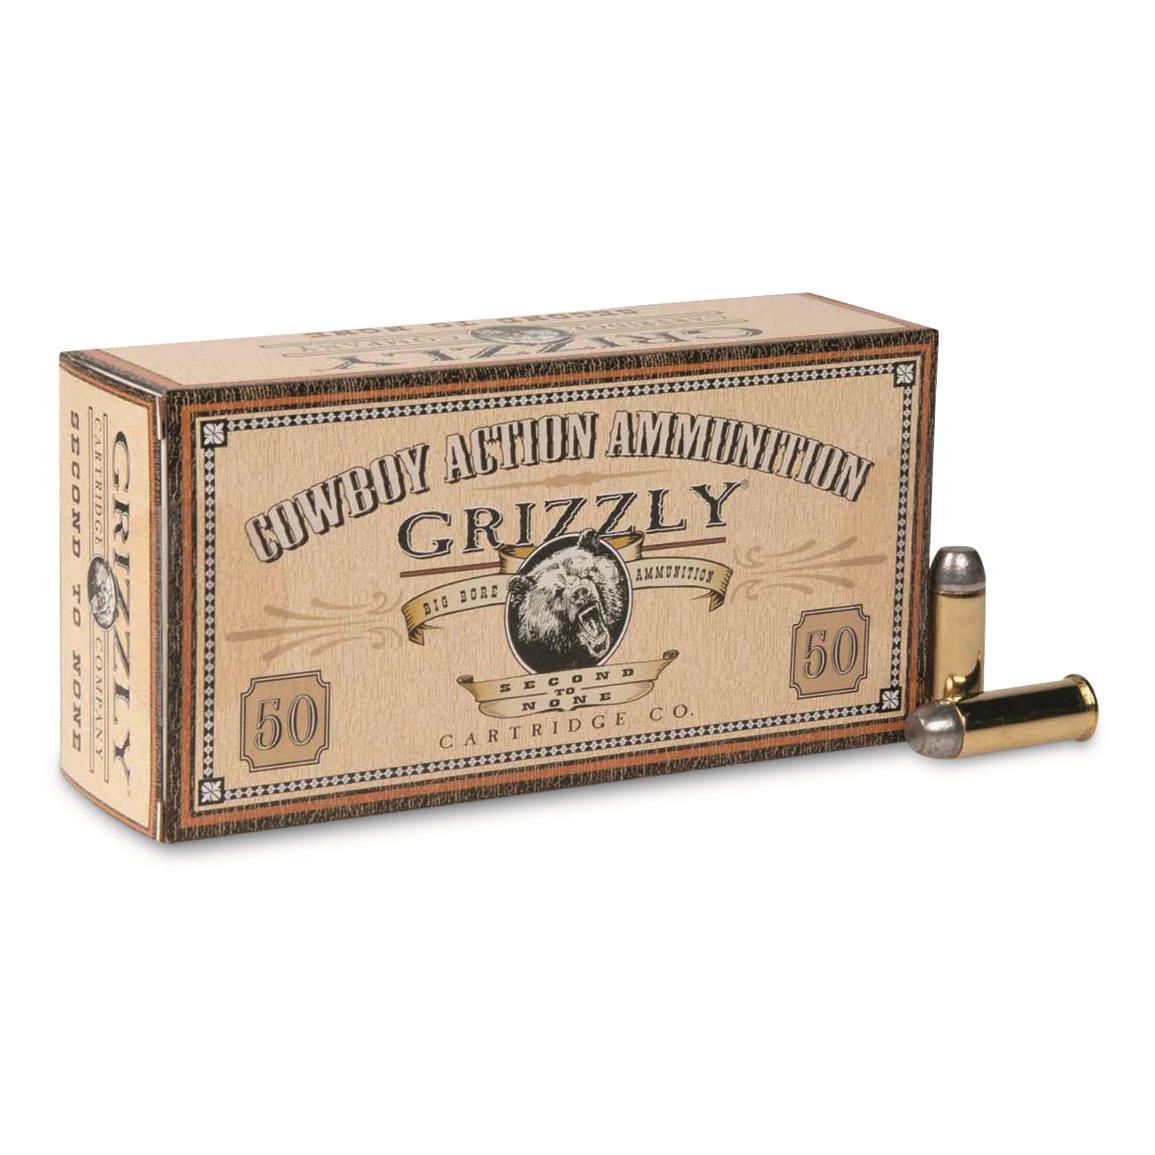 Grizzly Cartridge Co. Cowboy Action Ammo, .44 Special, RNFP, 200 Grain, 50 Rounds